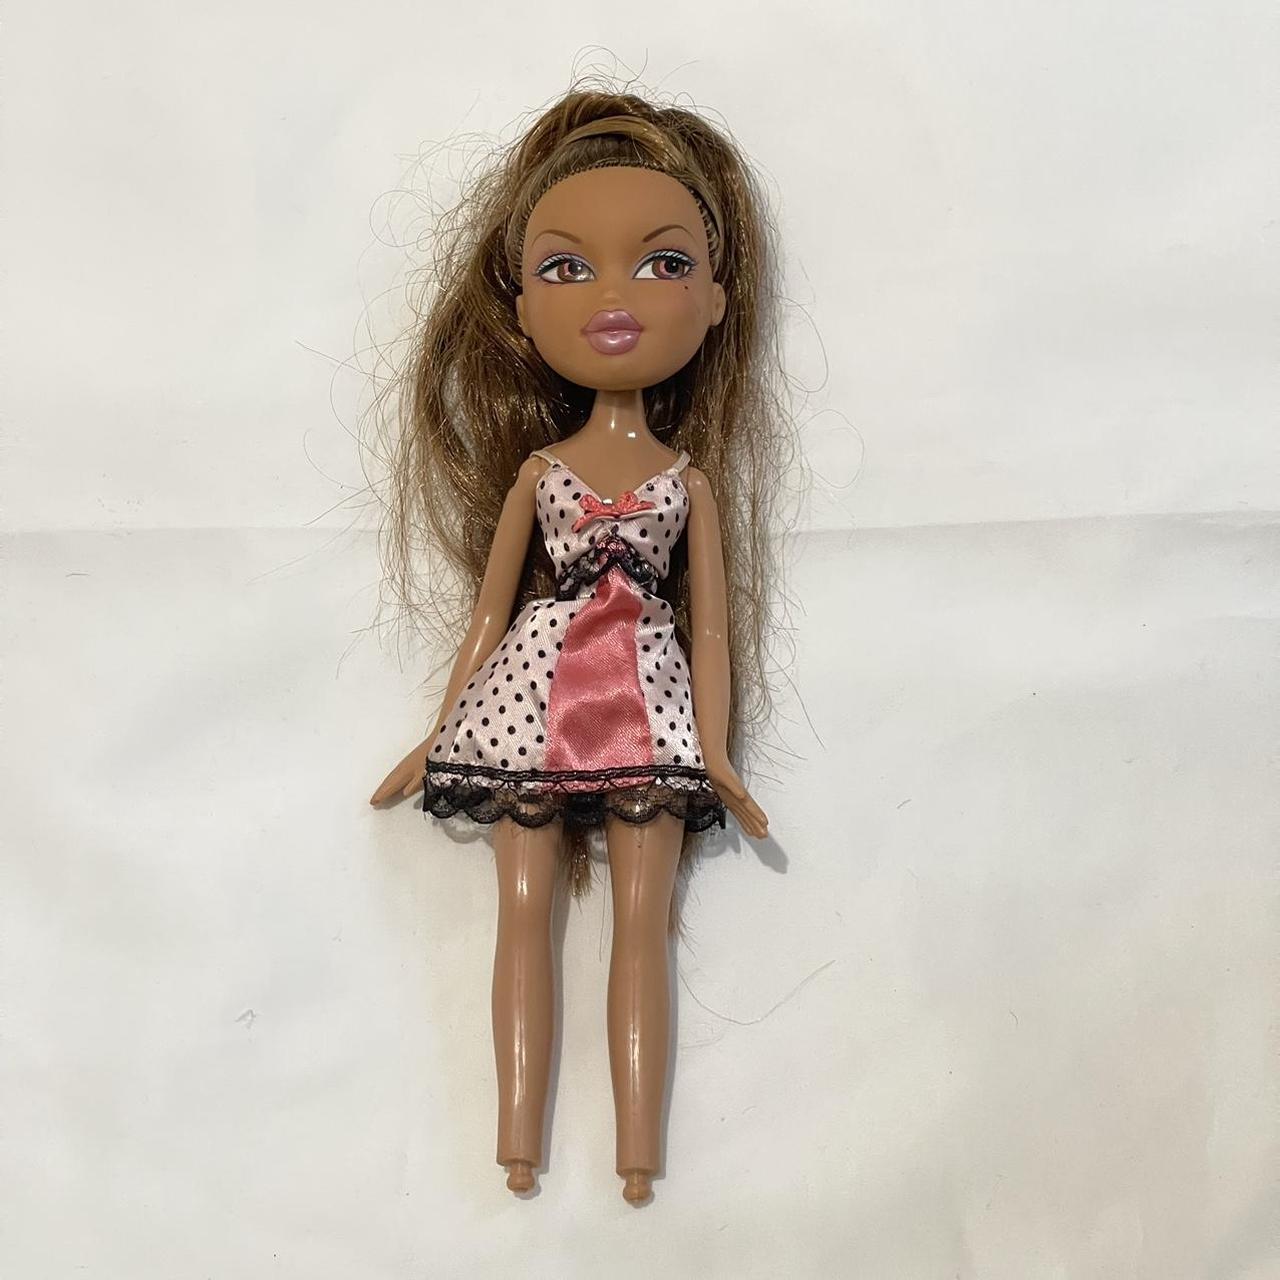 Old Original братц Doll Toy for Girls 10th Let's Talk Cloe